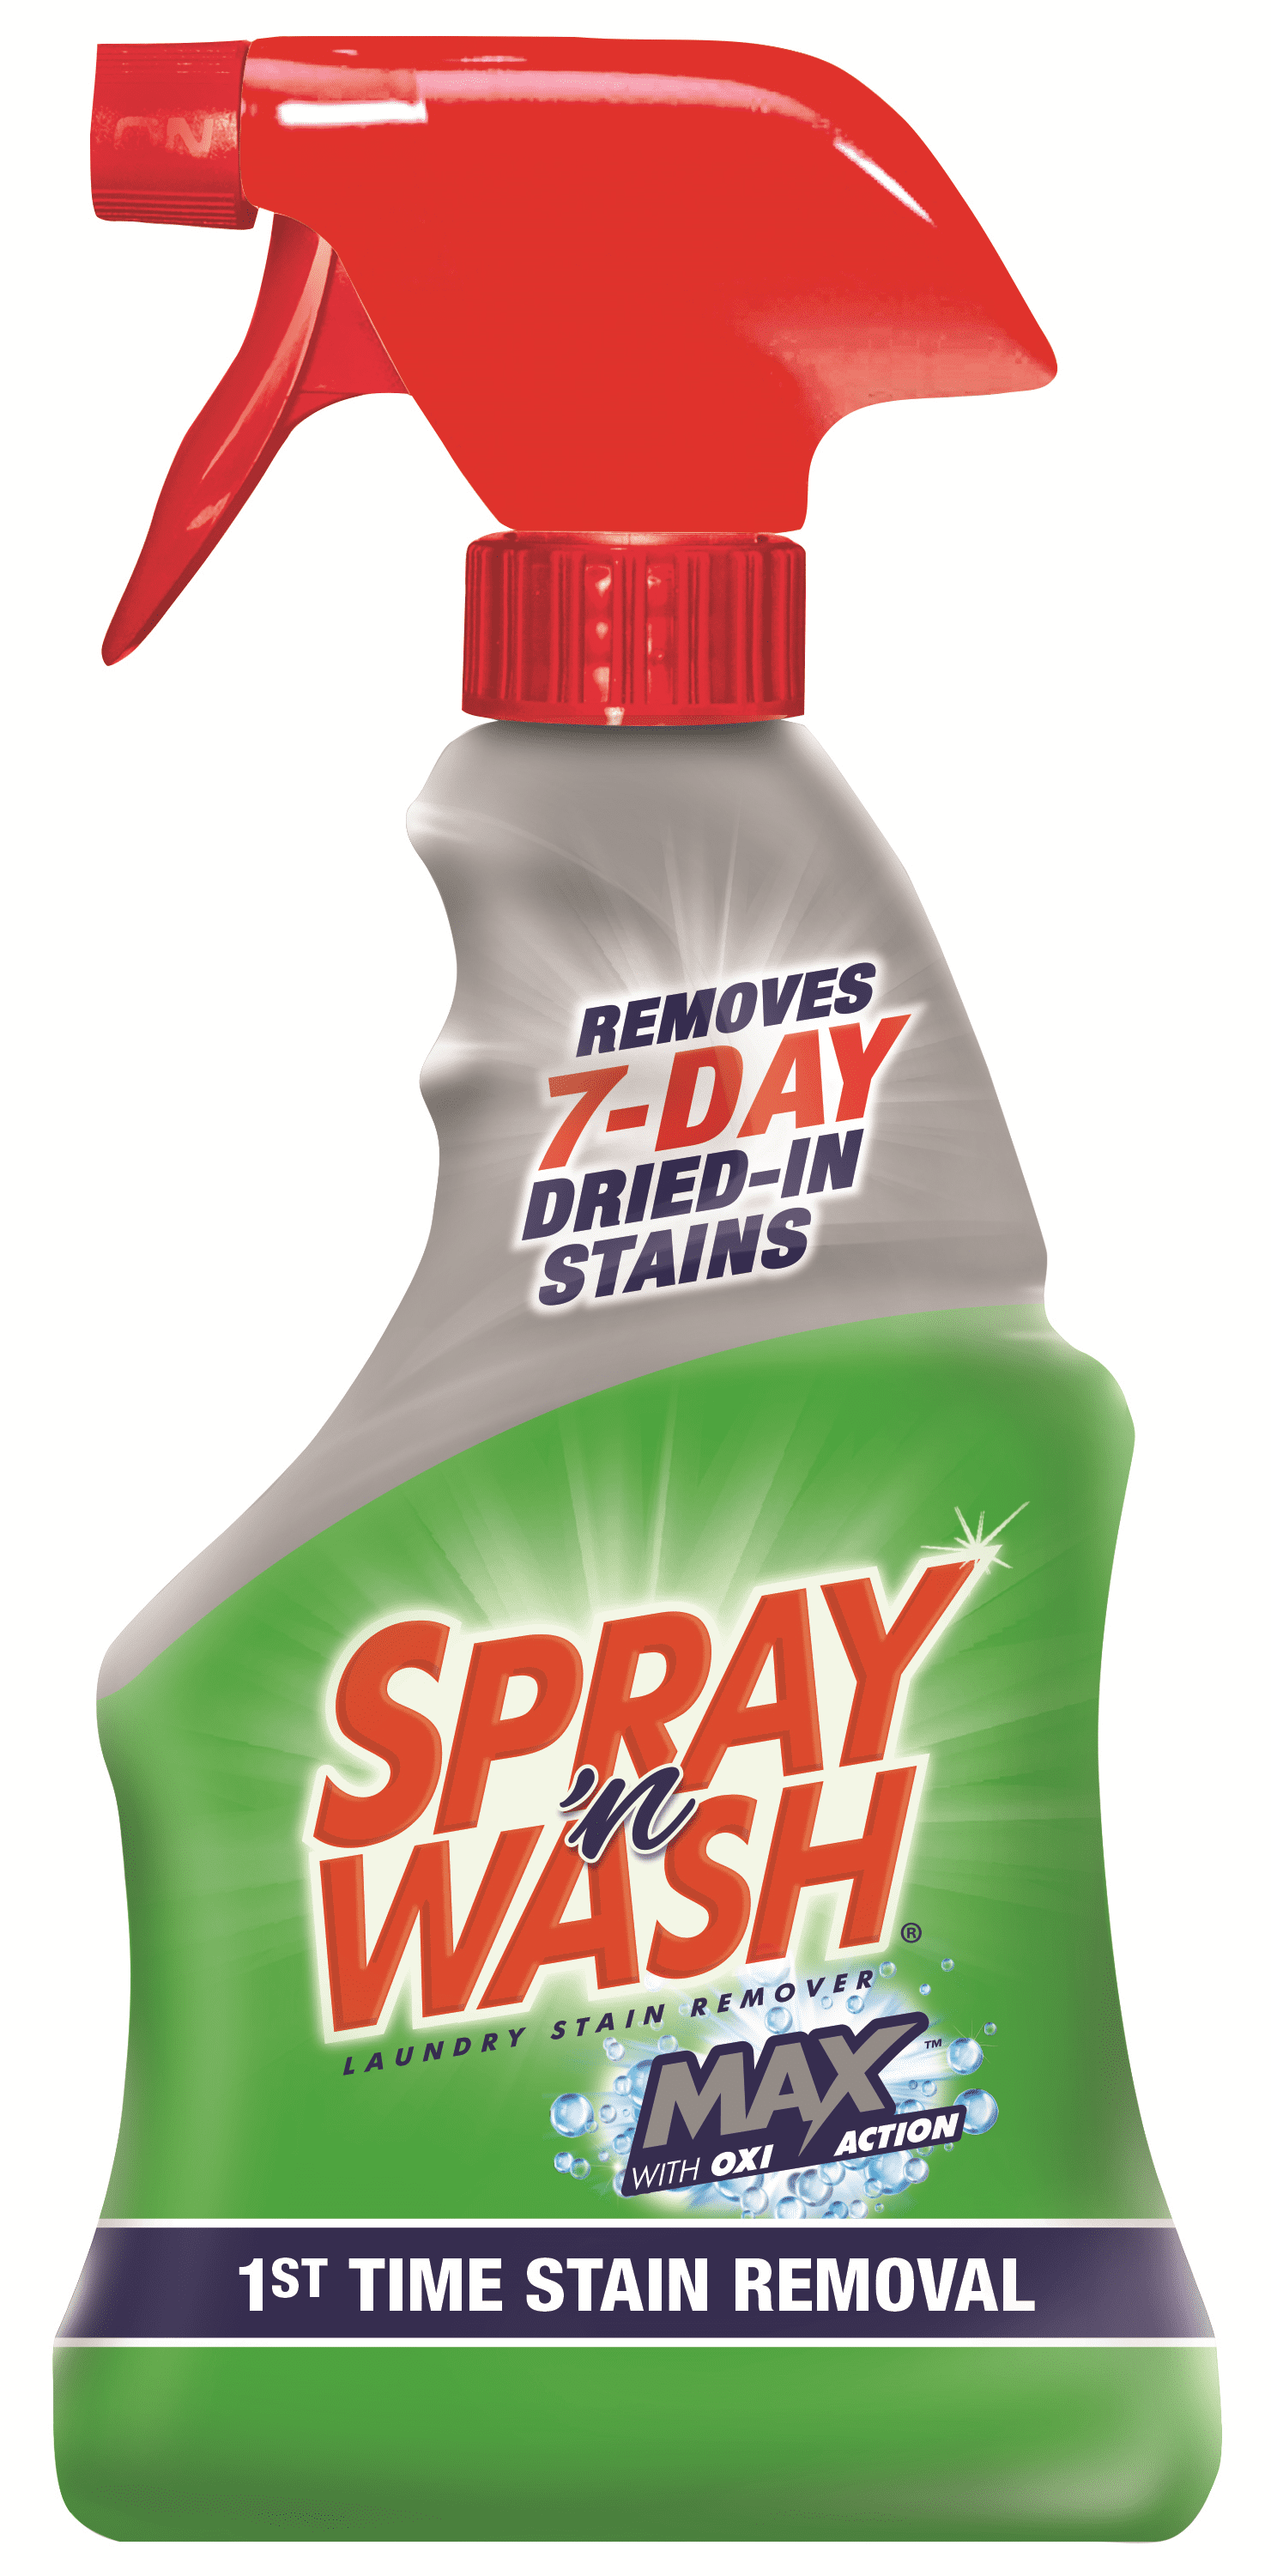 spray and wash stain remover